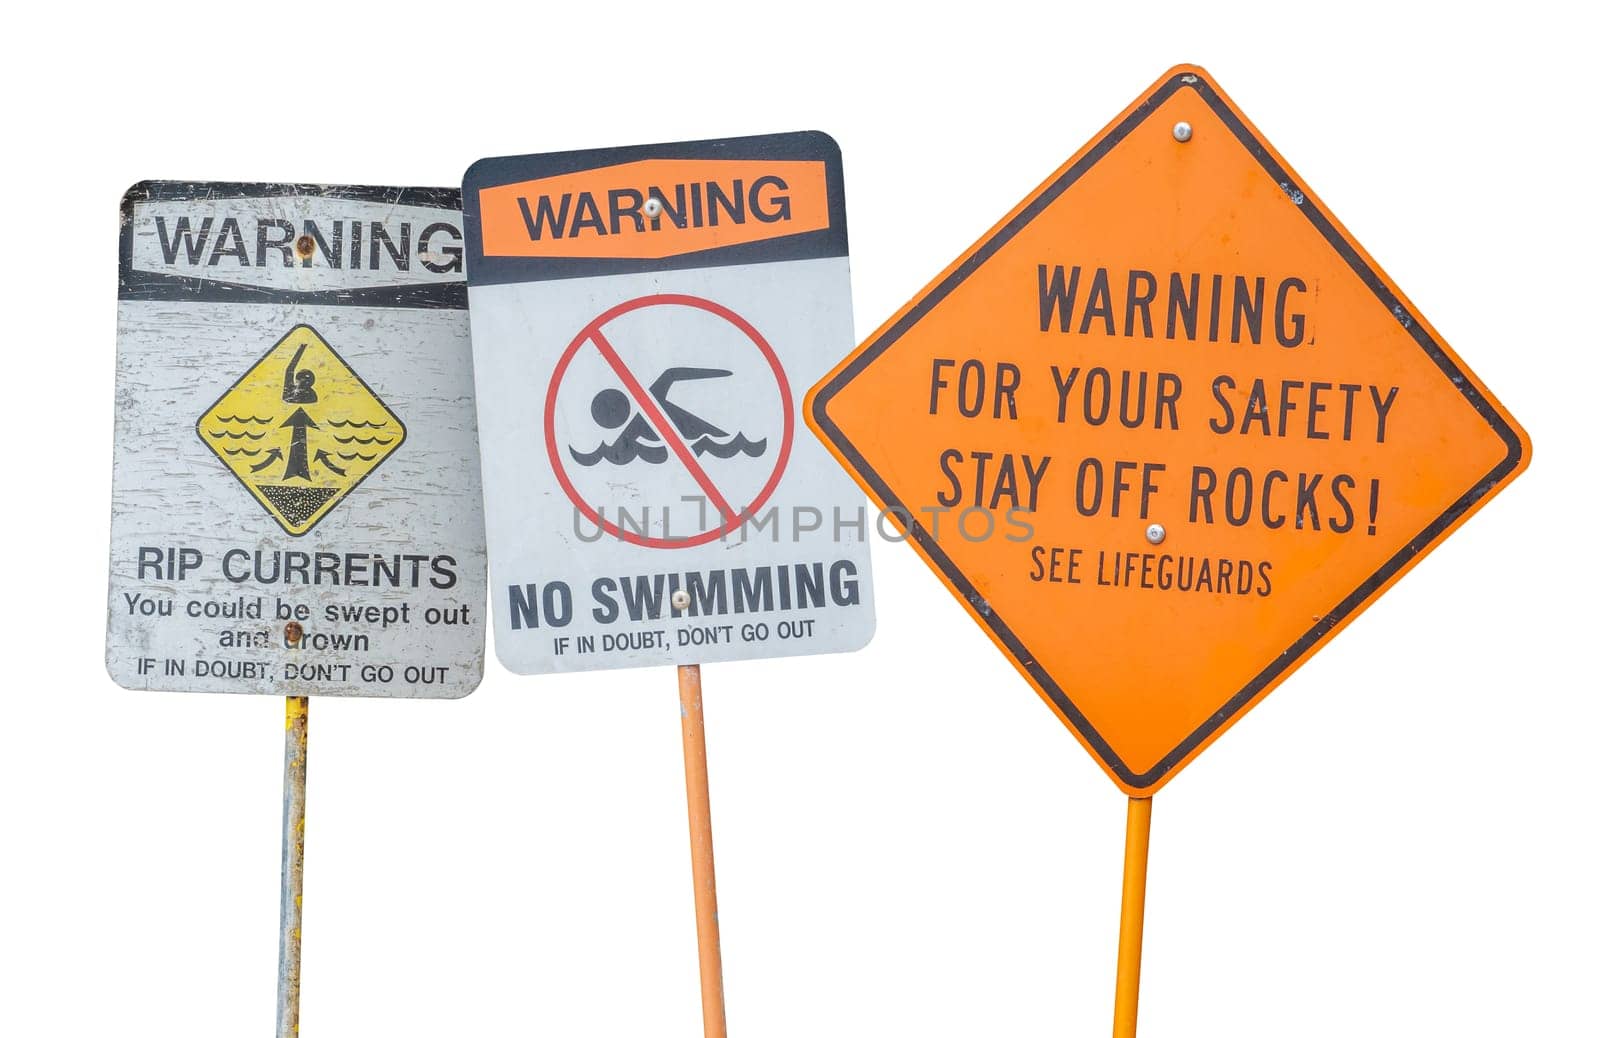 A Collection Of Water Safety Warning Signs, As Seen At A Beach Or Lake Or River, Isolated On A White Background